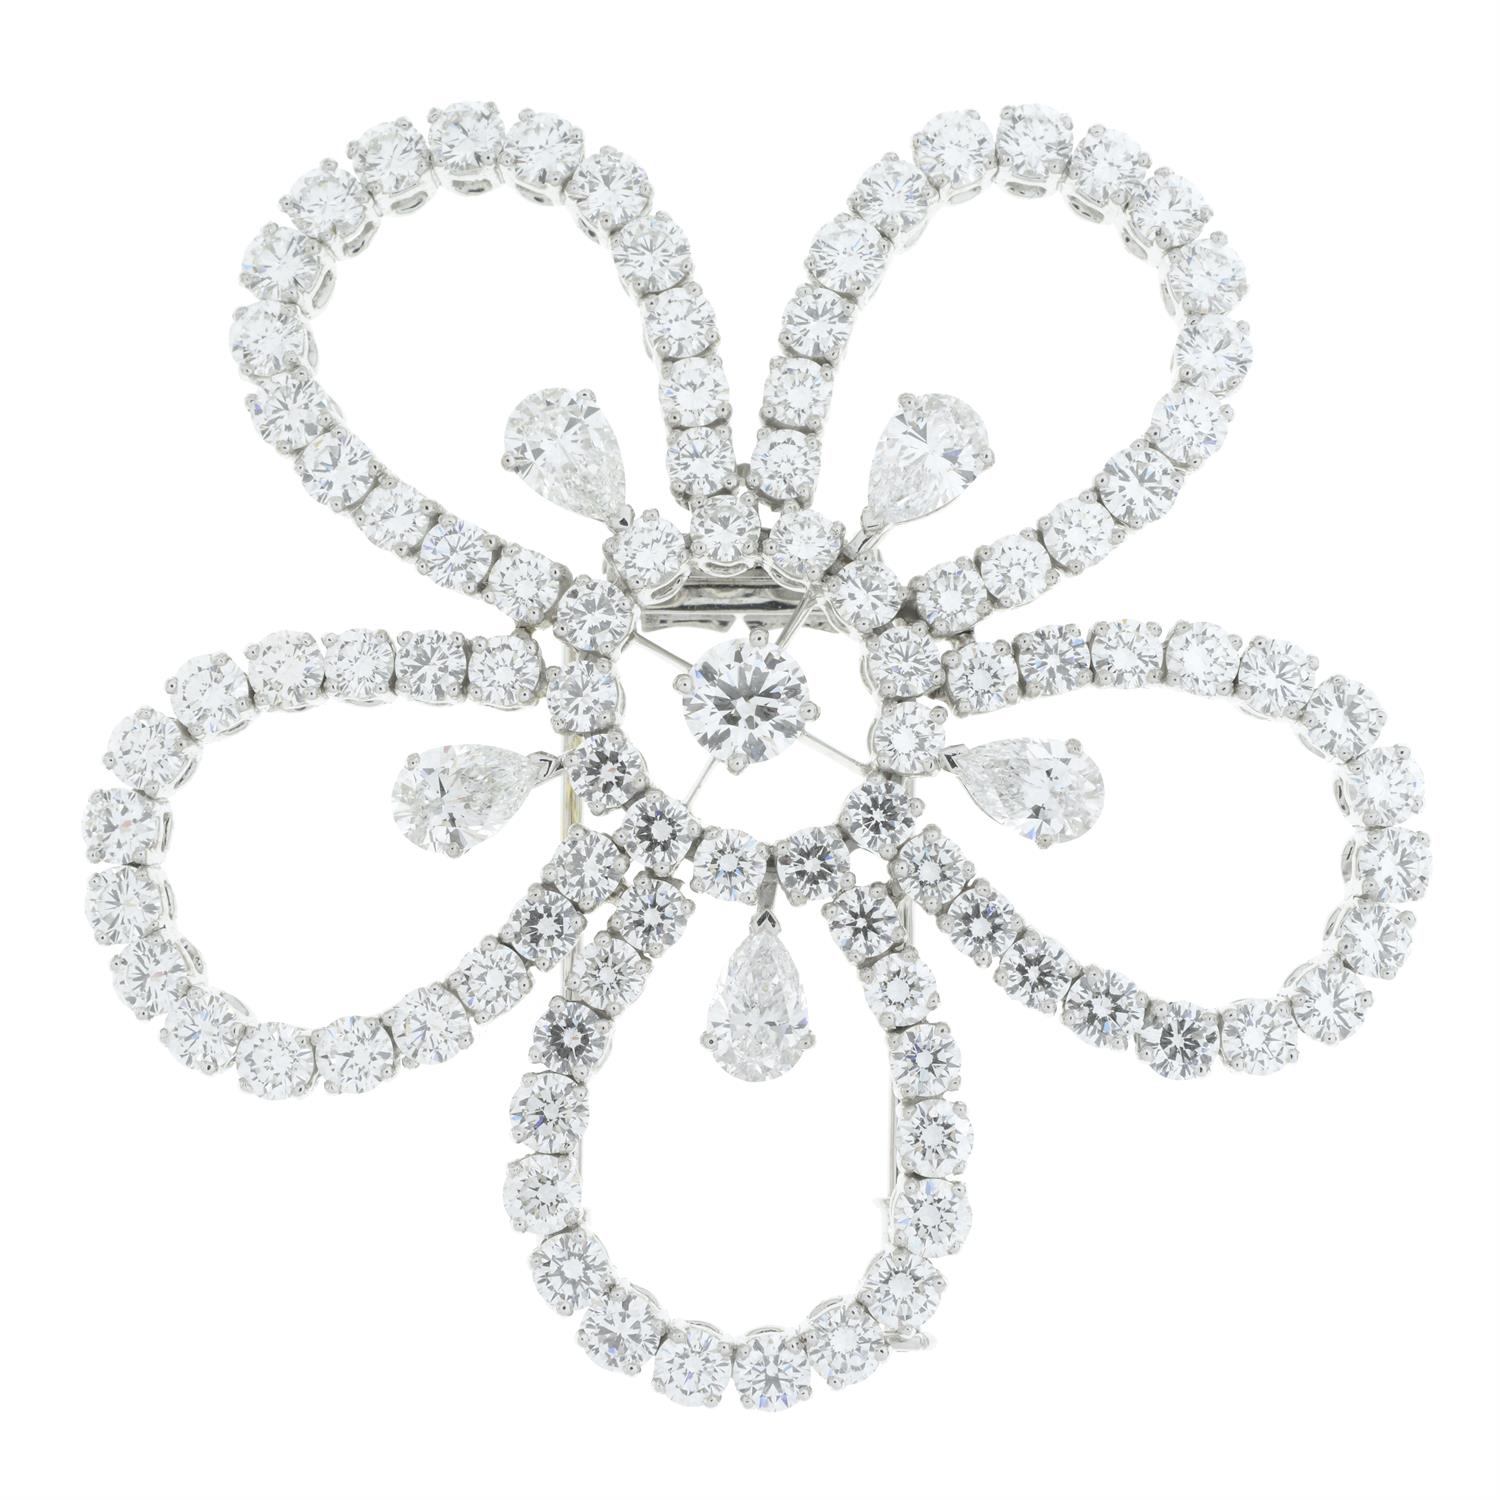 18ct gold diamond flower clip, by Ritz - Image 2 of 4